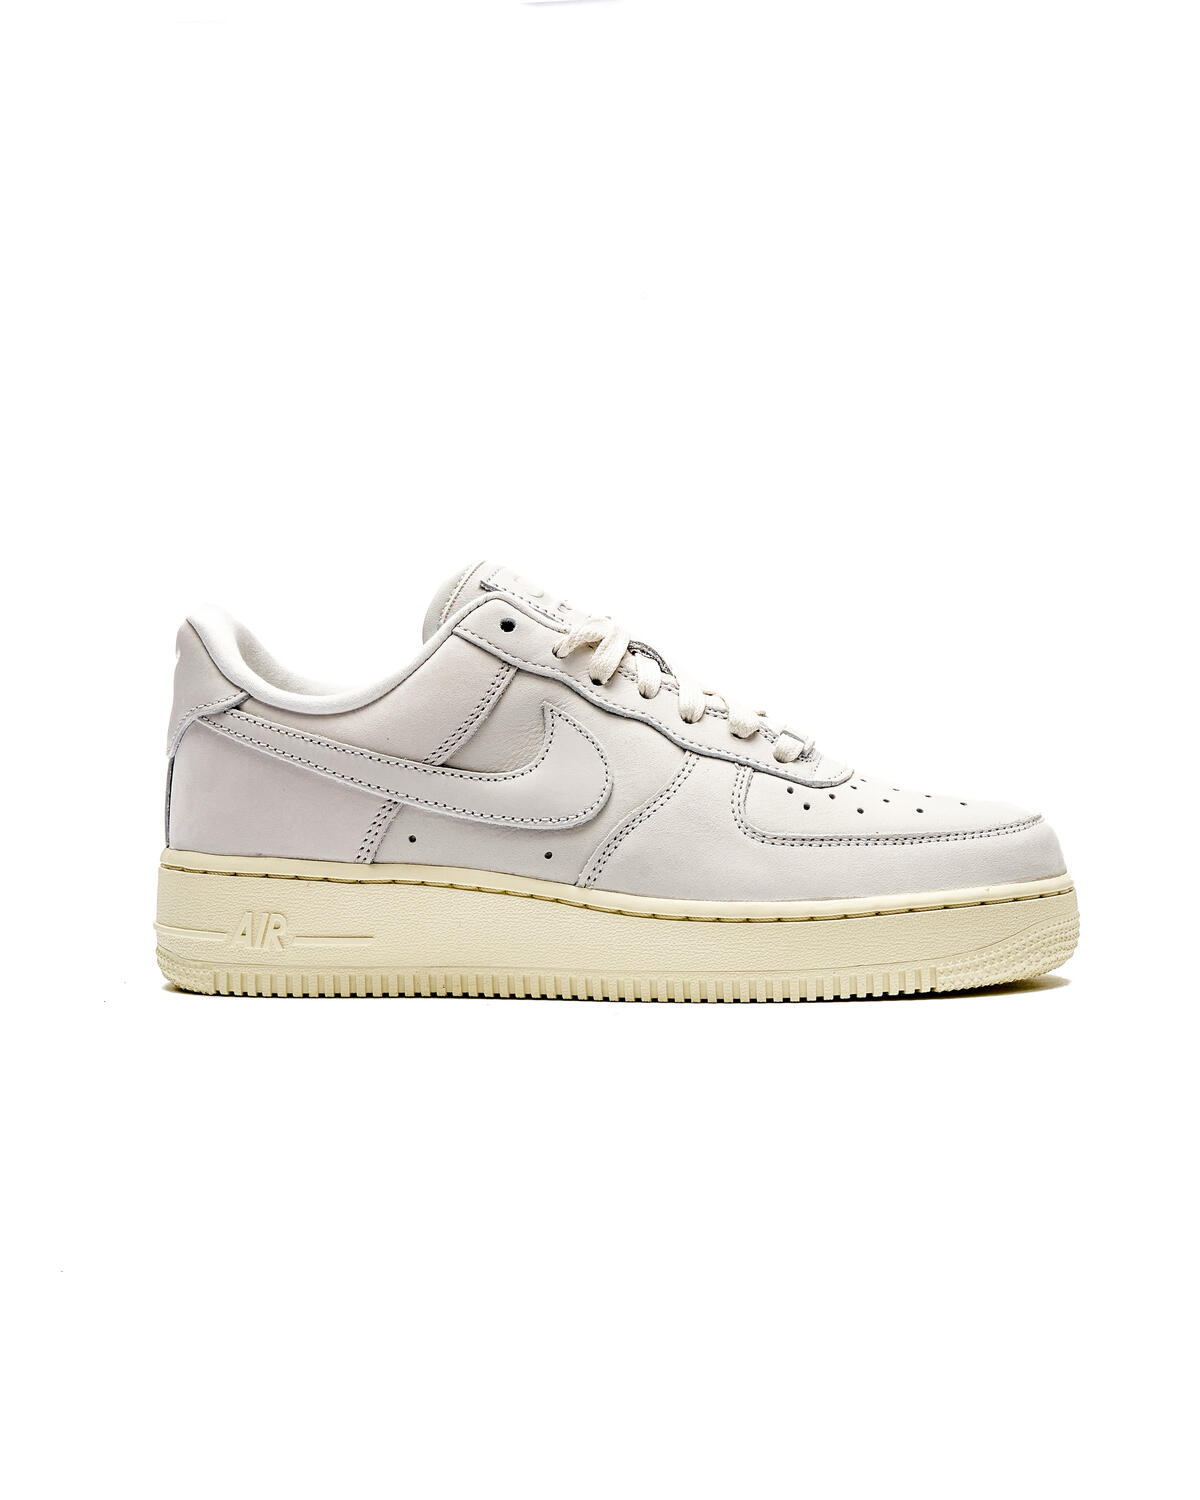 Nike WMNS AIR FORCE 1 PRM MF | DR9503-100 | AFEW STORE